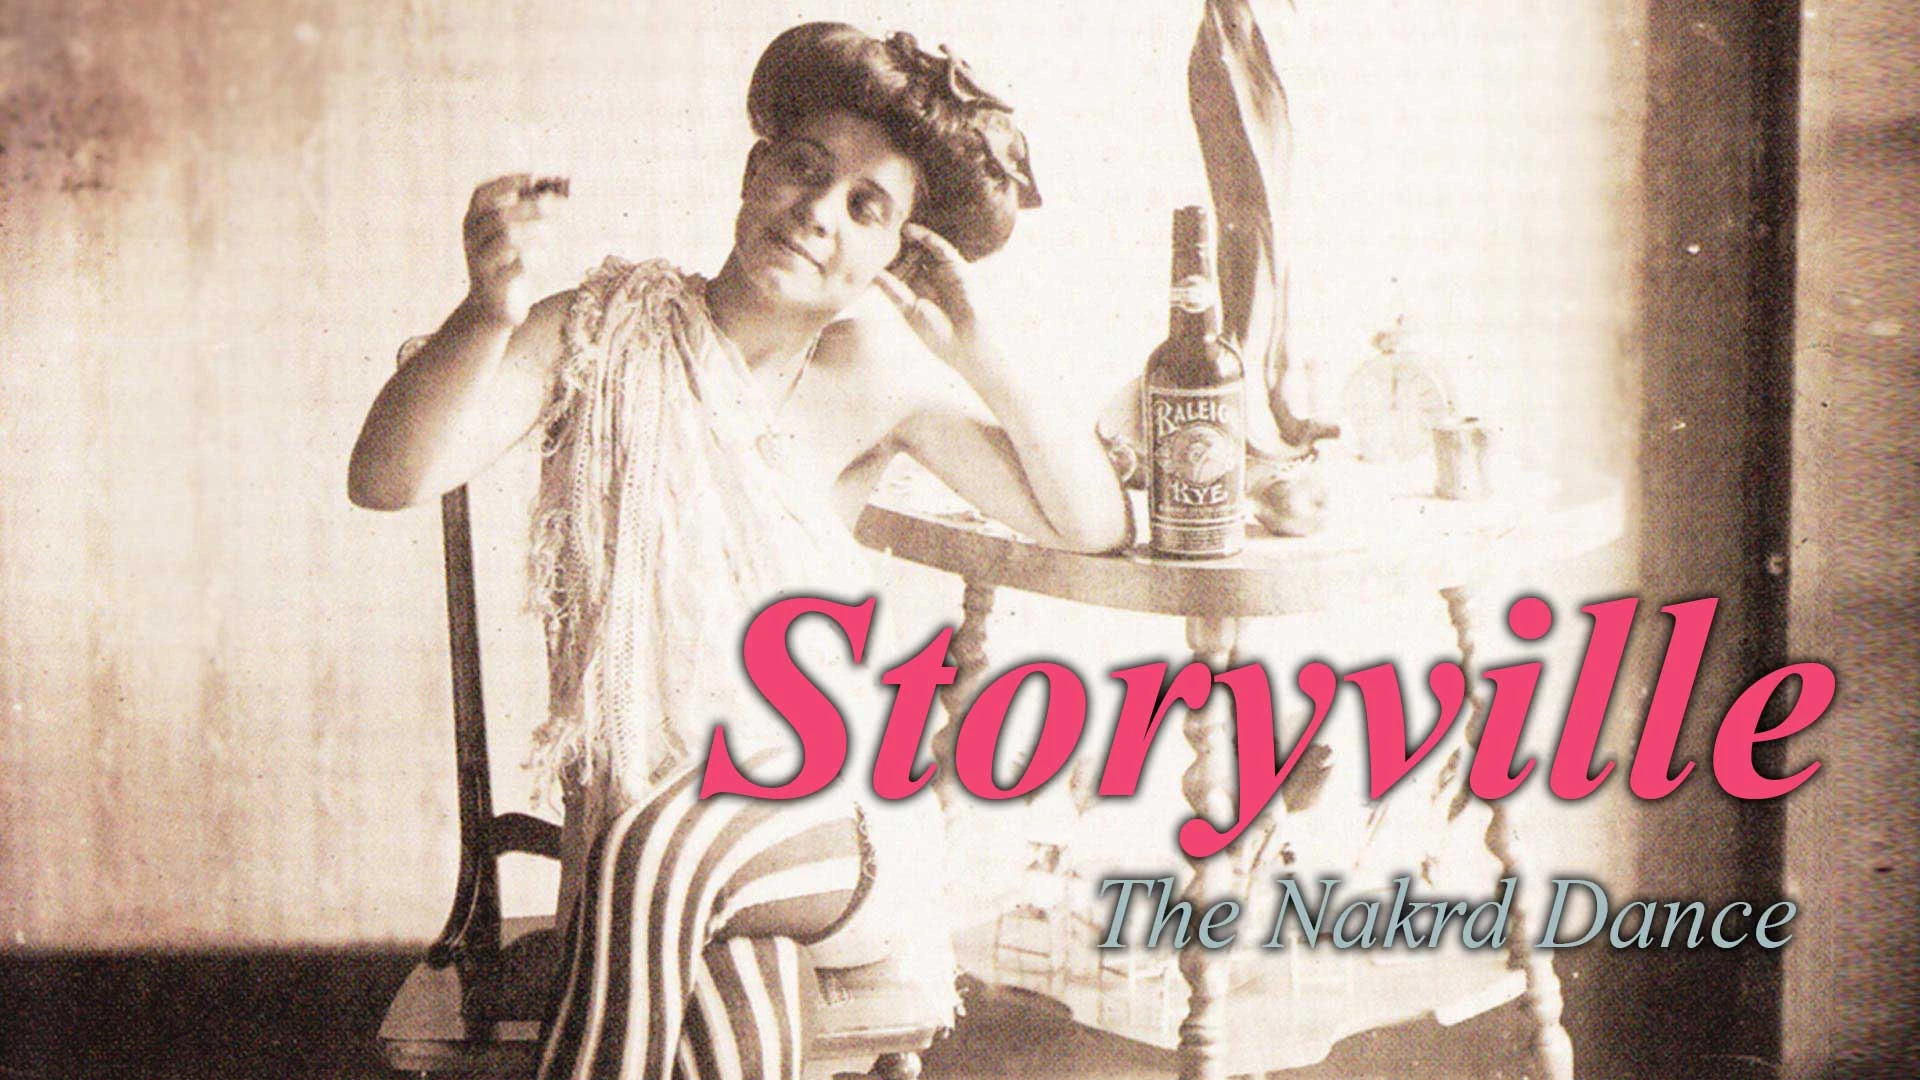 Storyville: The Naked Dance